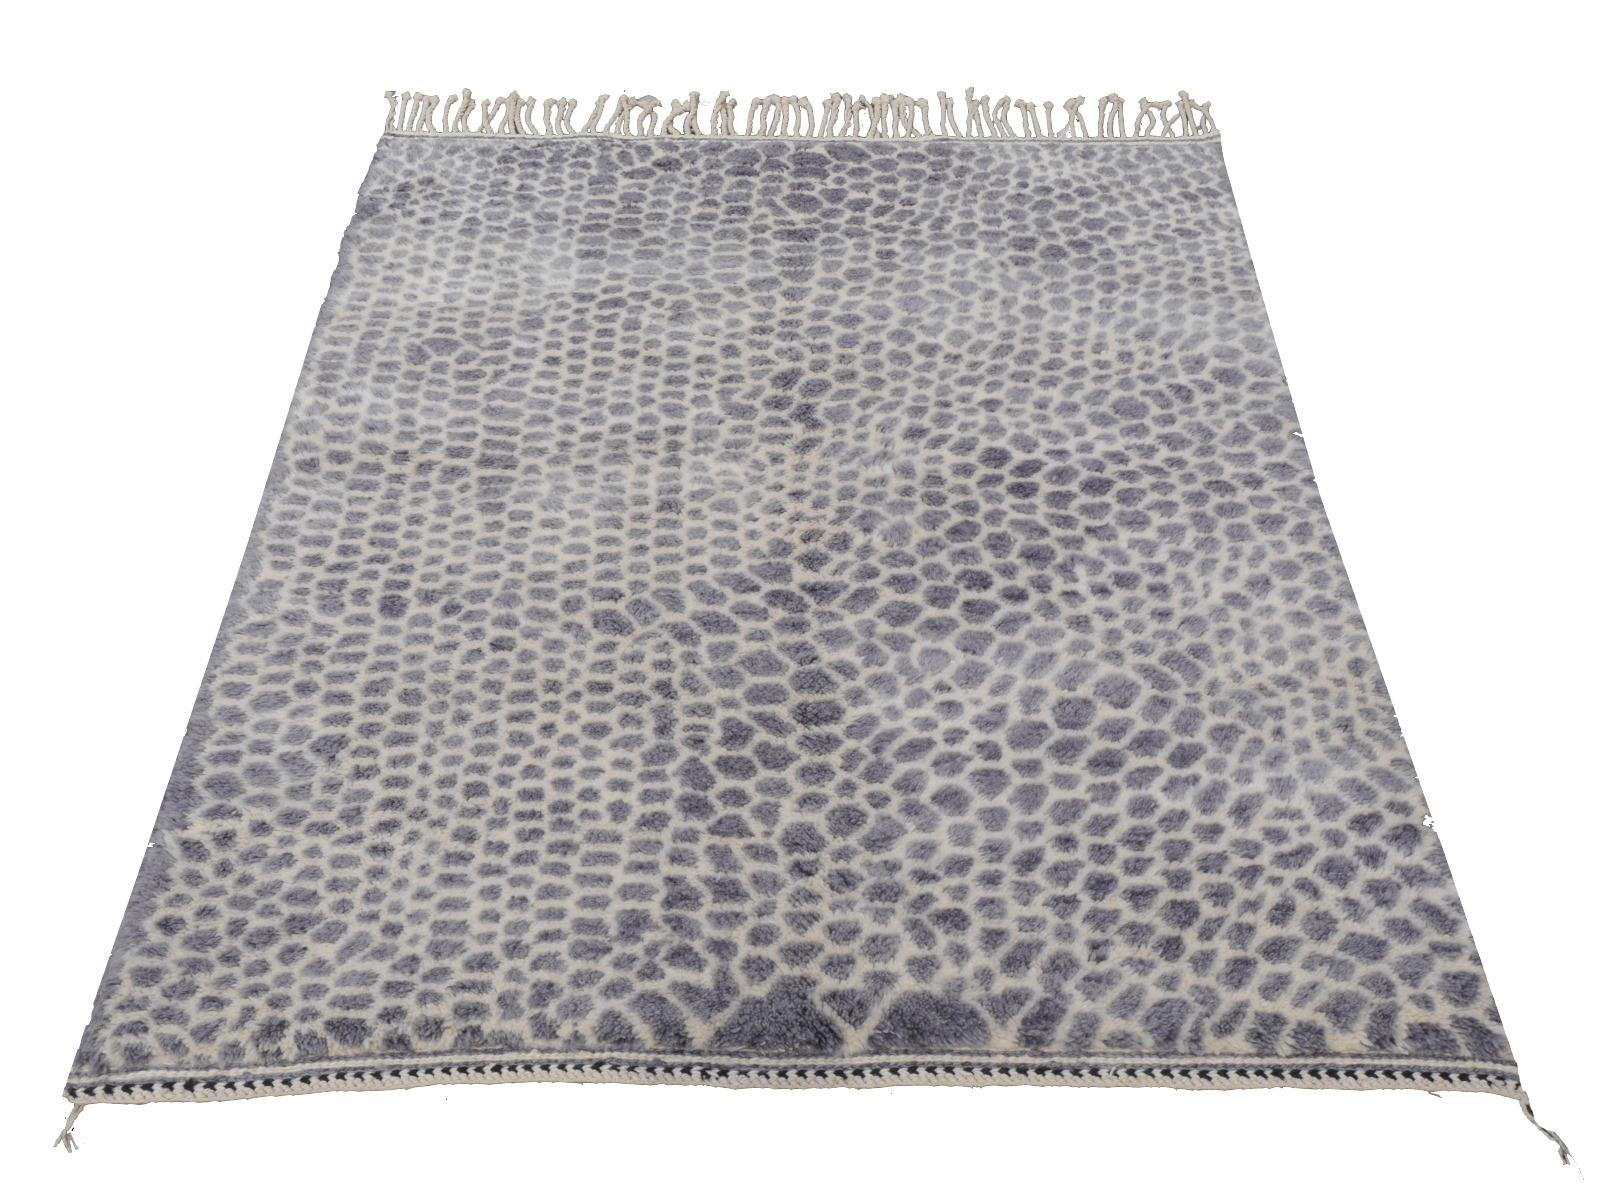 Hand-Knotted North African Moroccan Berber Rug Leopard Cheetah Design Soft Quality Gray Beige For Sale